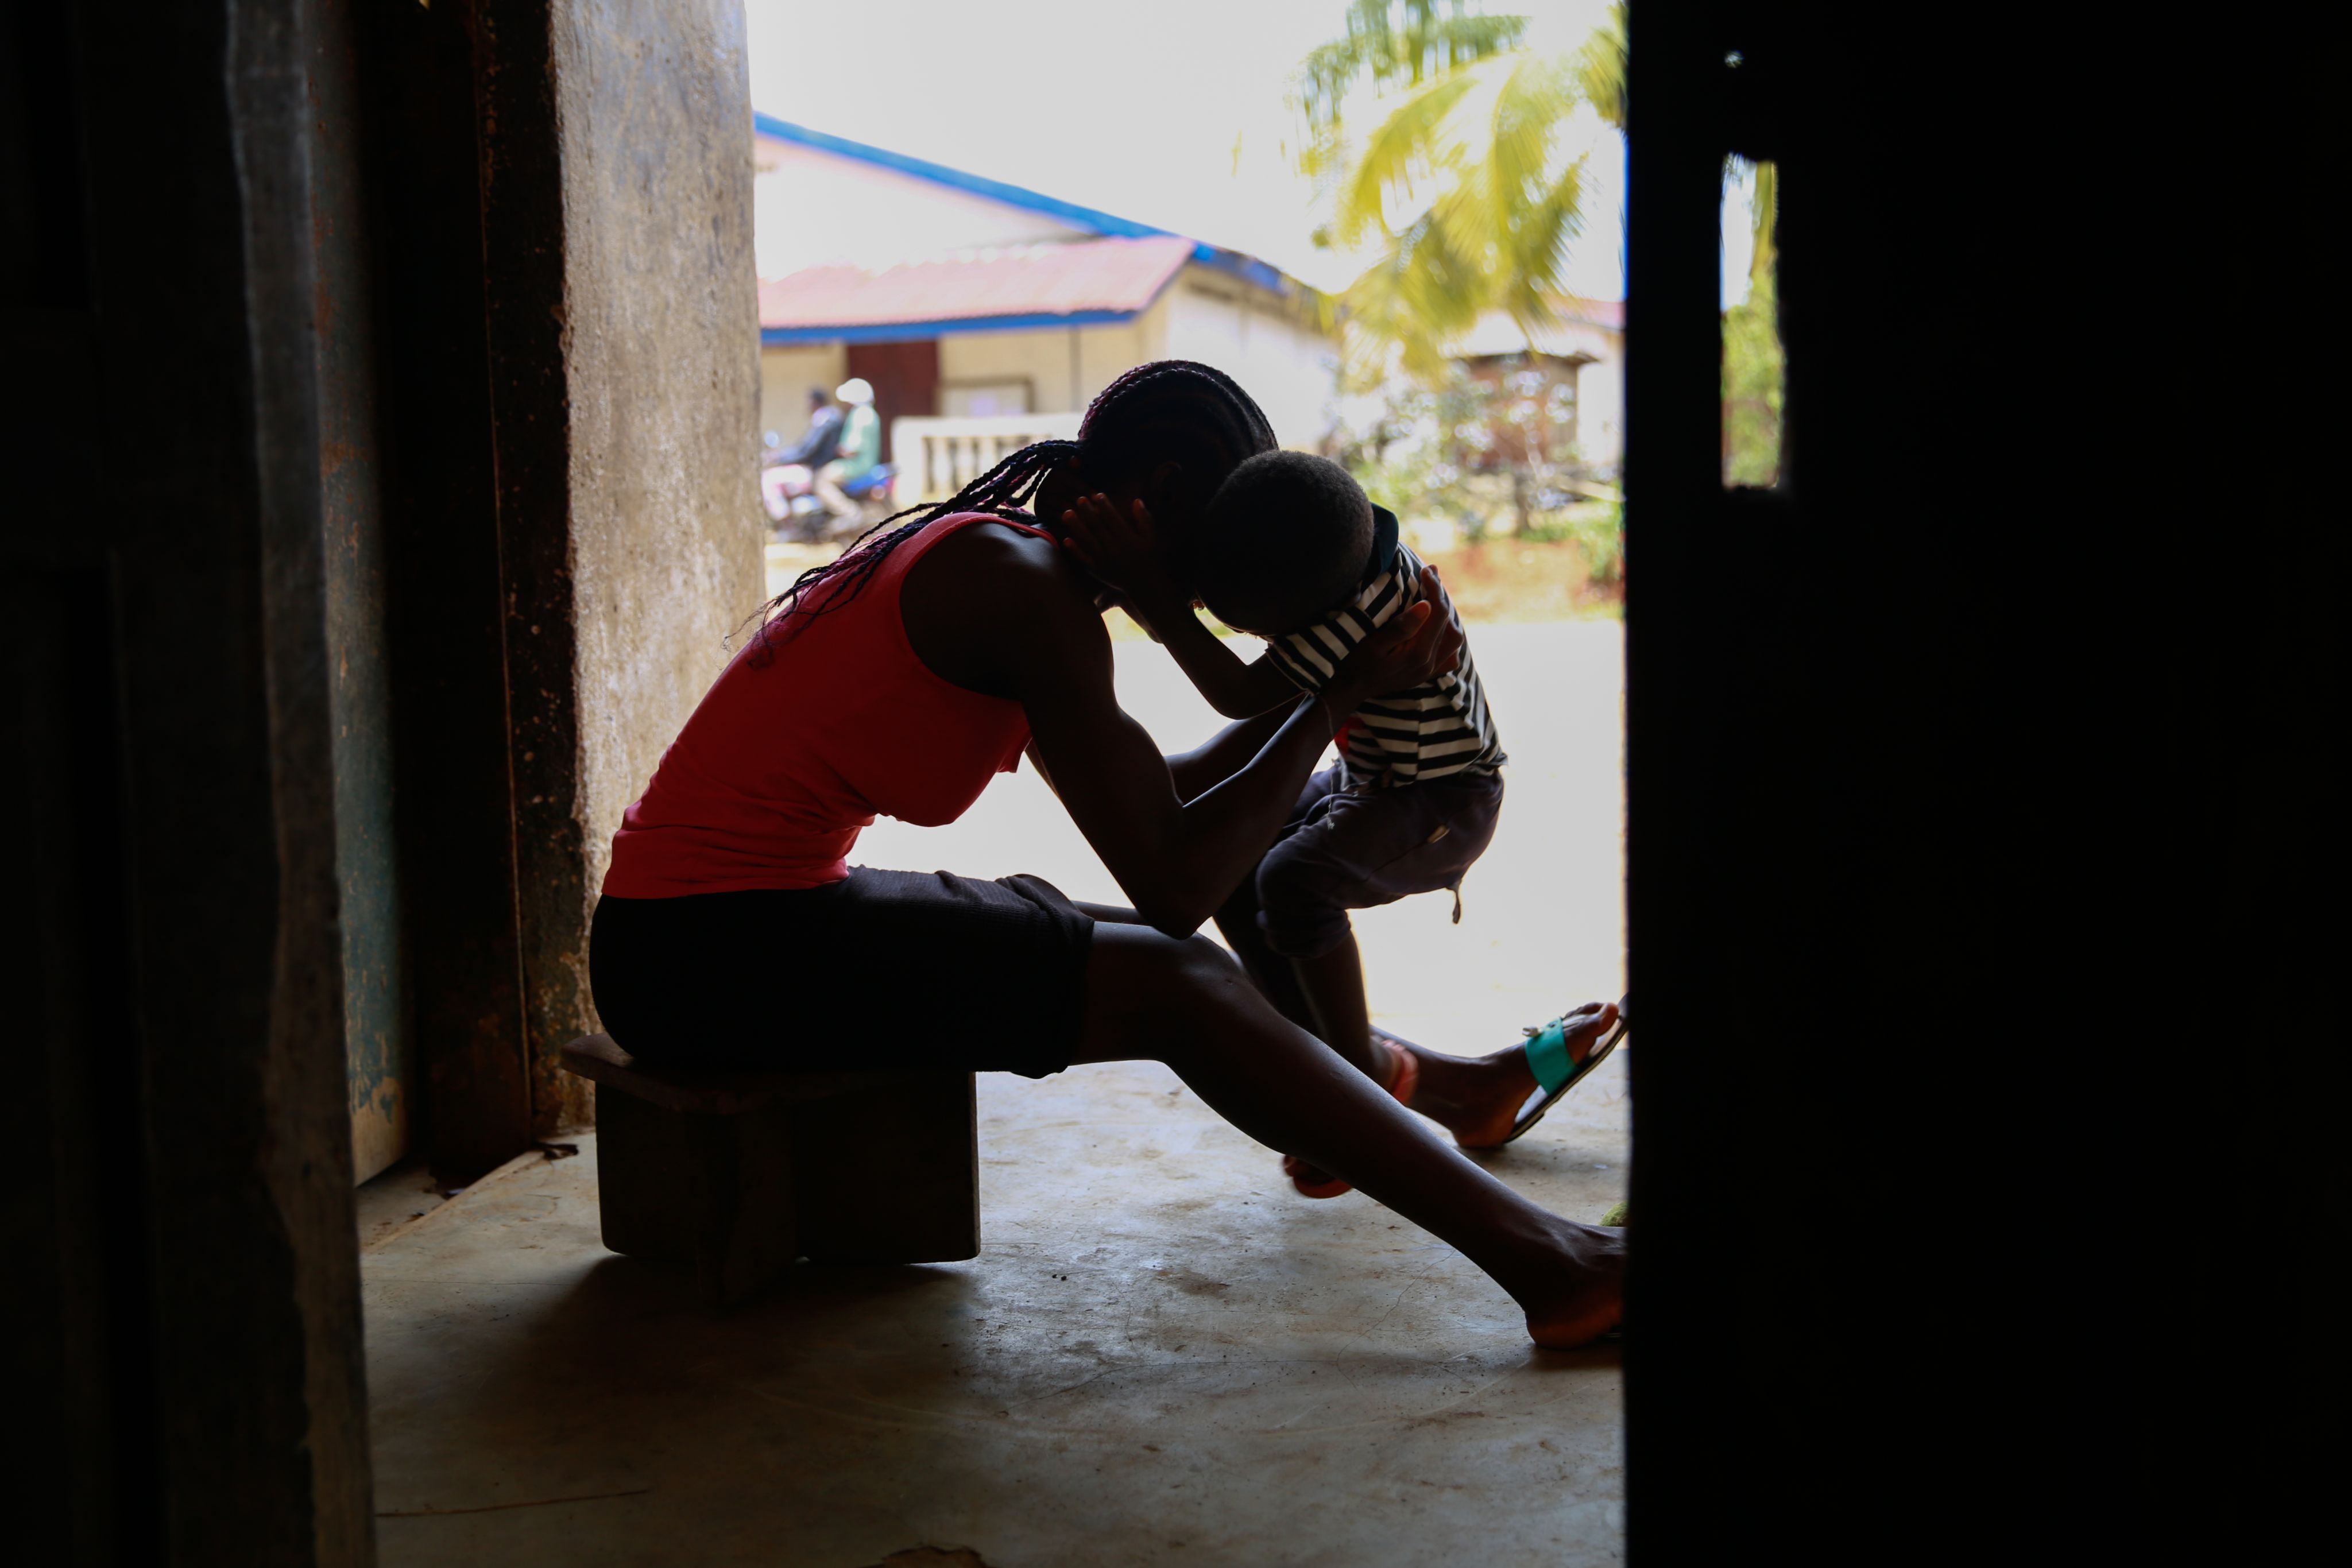 Kuji*, 19, plays with her 3 year old son at home in Kailahun, Sierra Leone